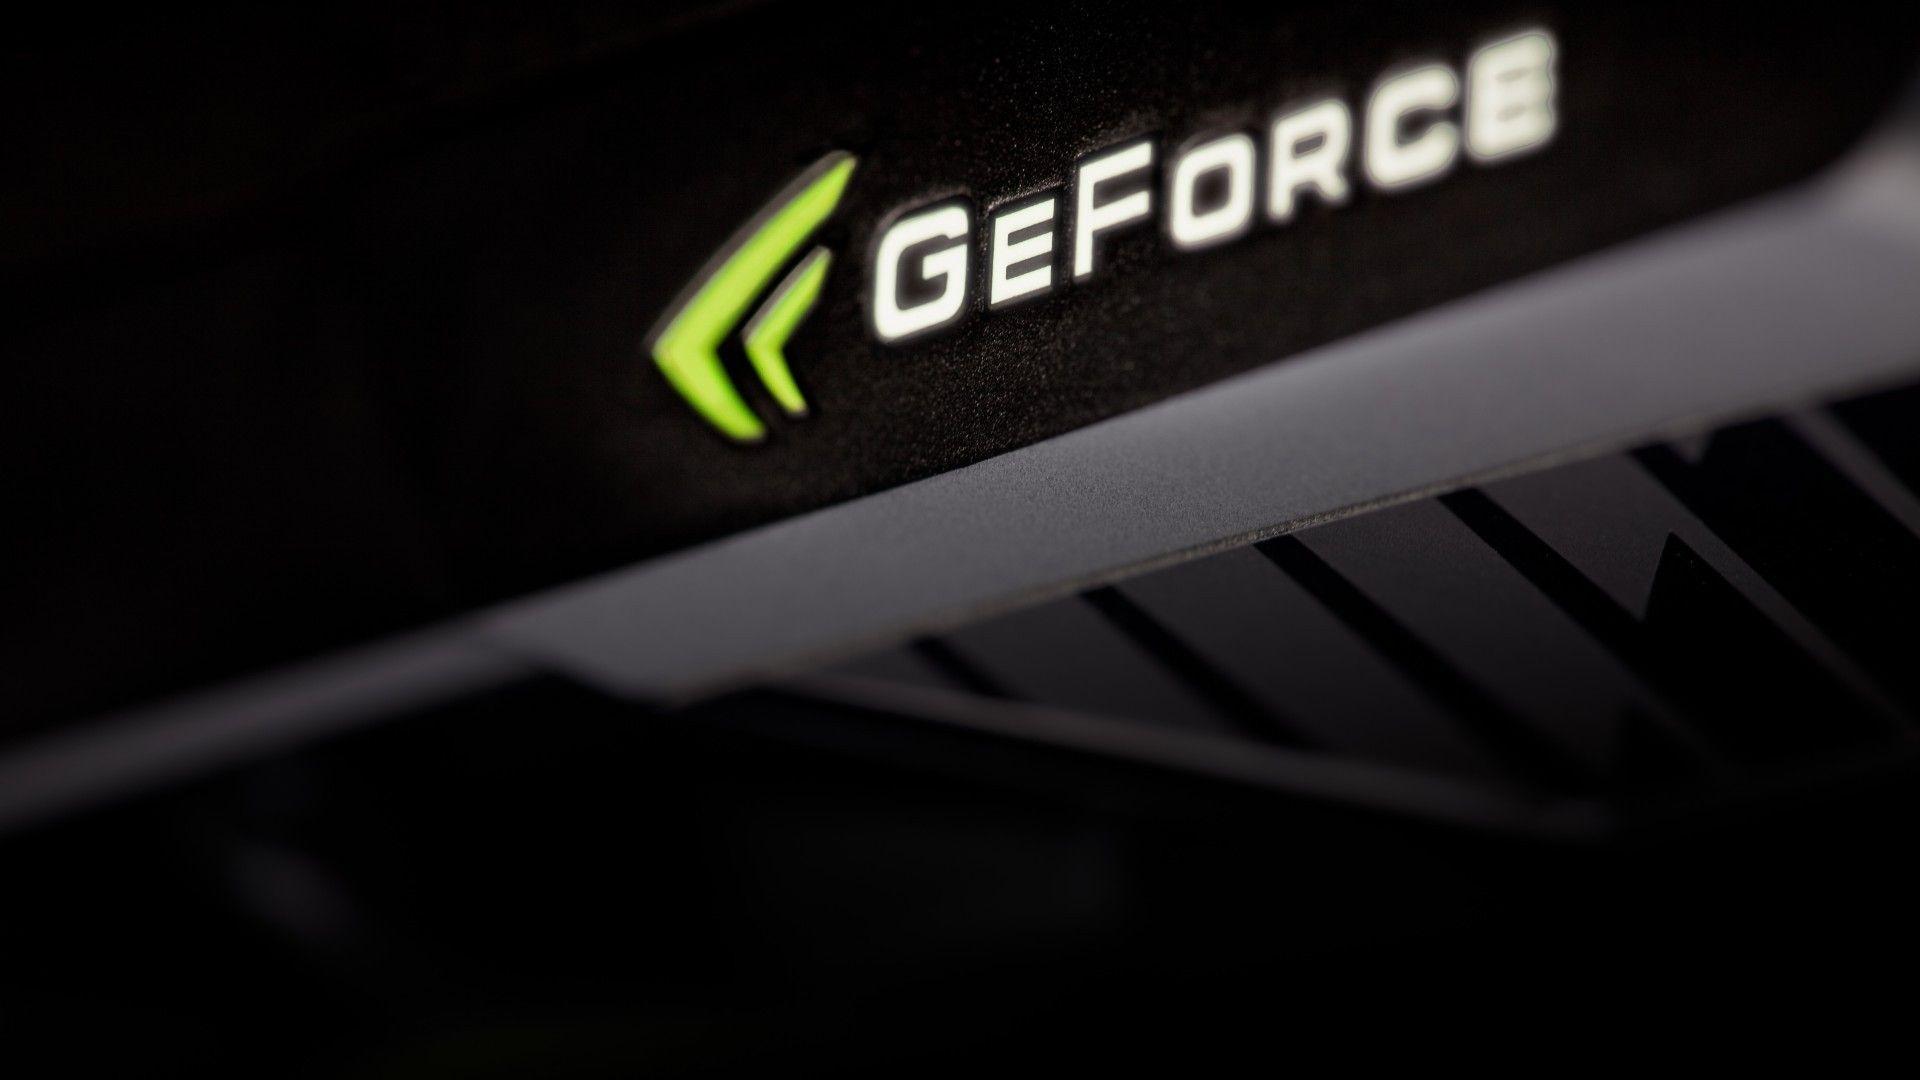 Nvidia GeForce HD Wallpapers 1080p